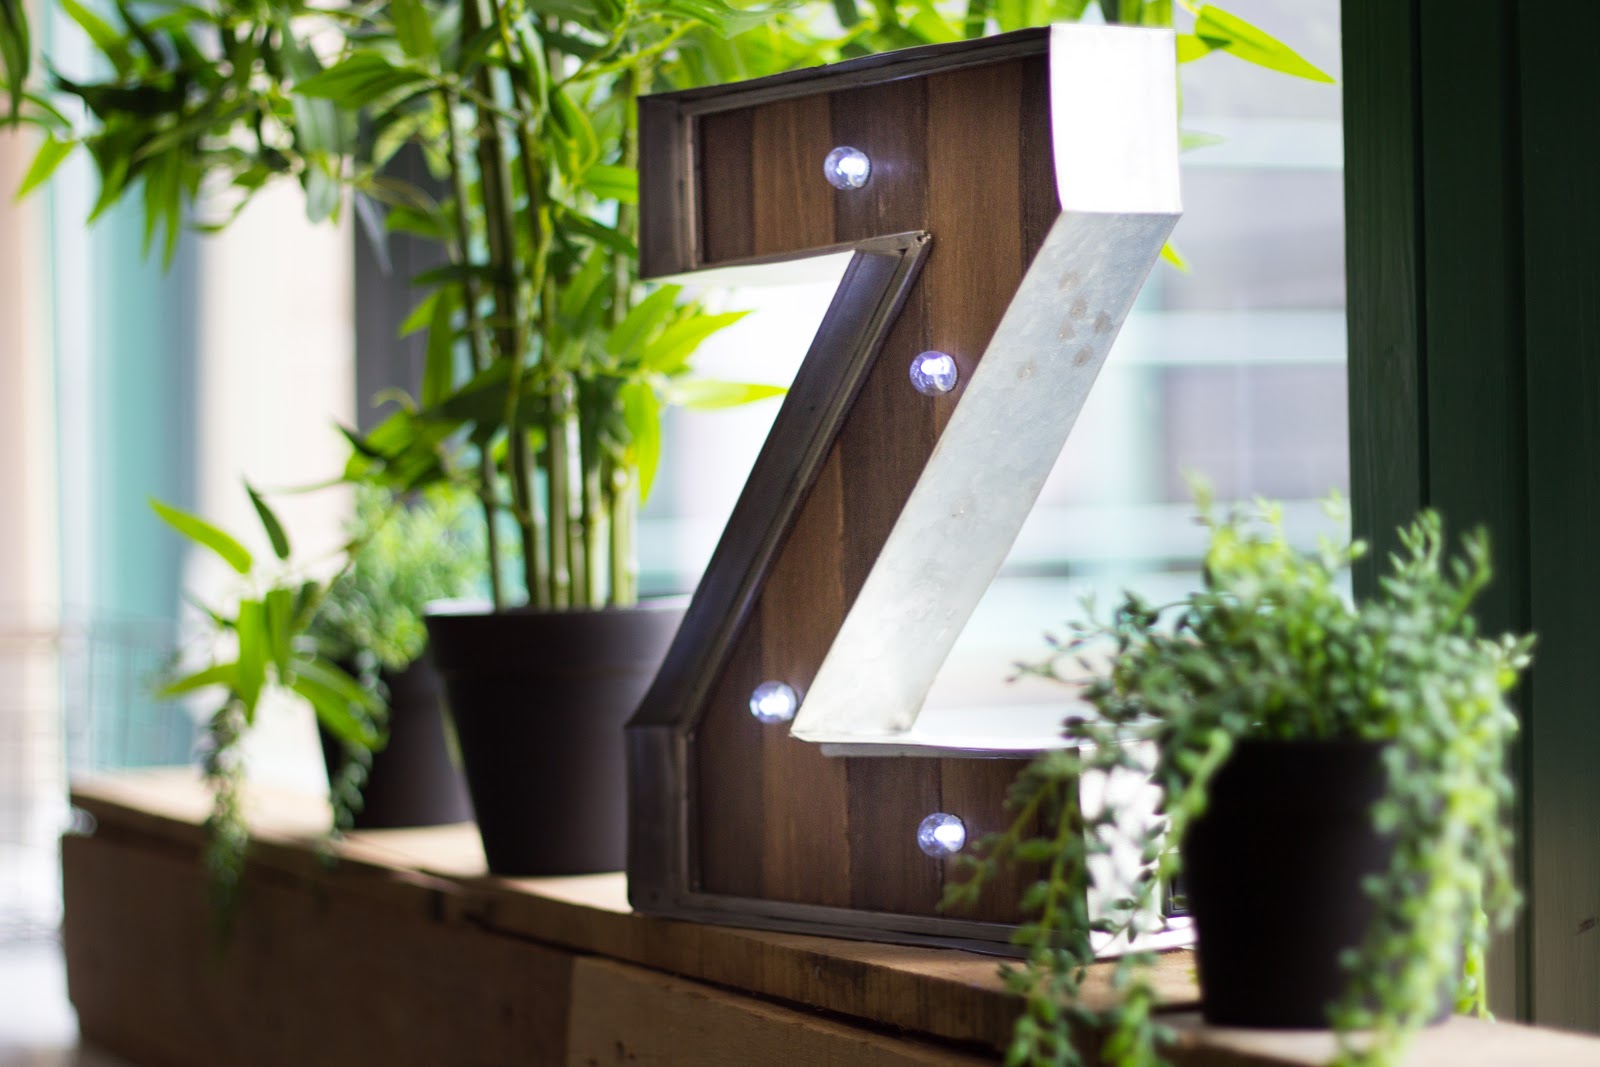 A photo of a "Z" sign from the Zest Digital office.